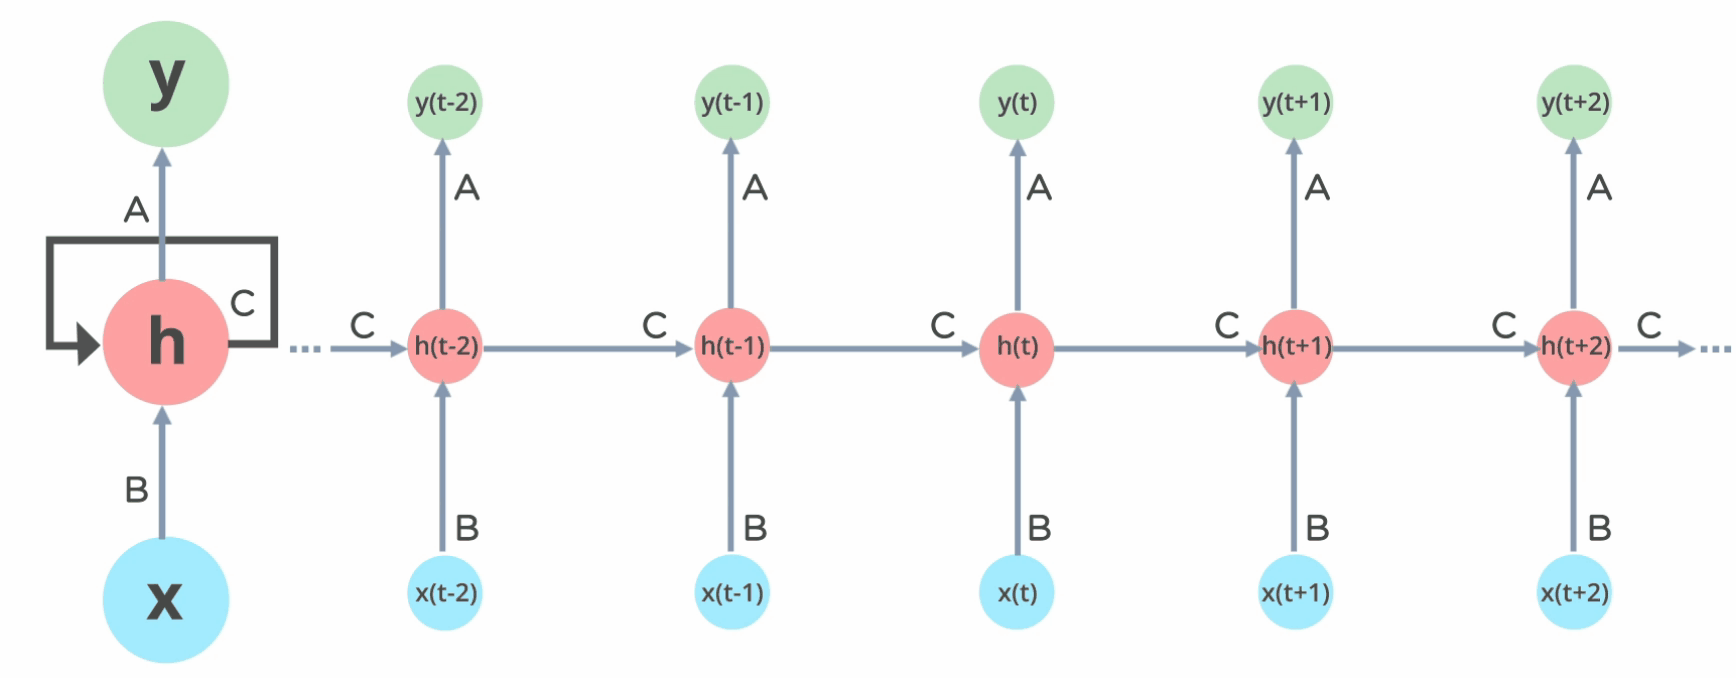 research on recurrent neural networks